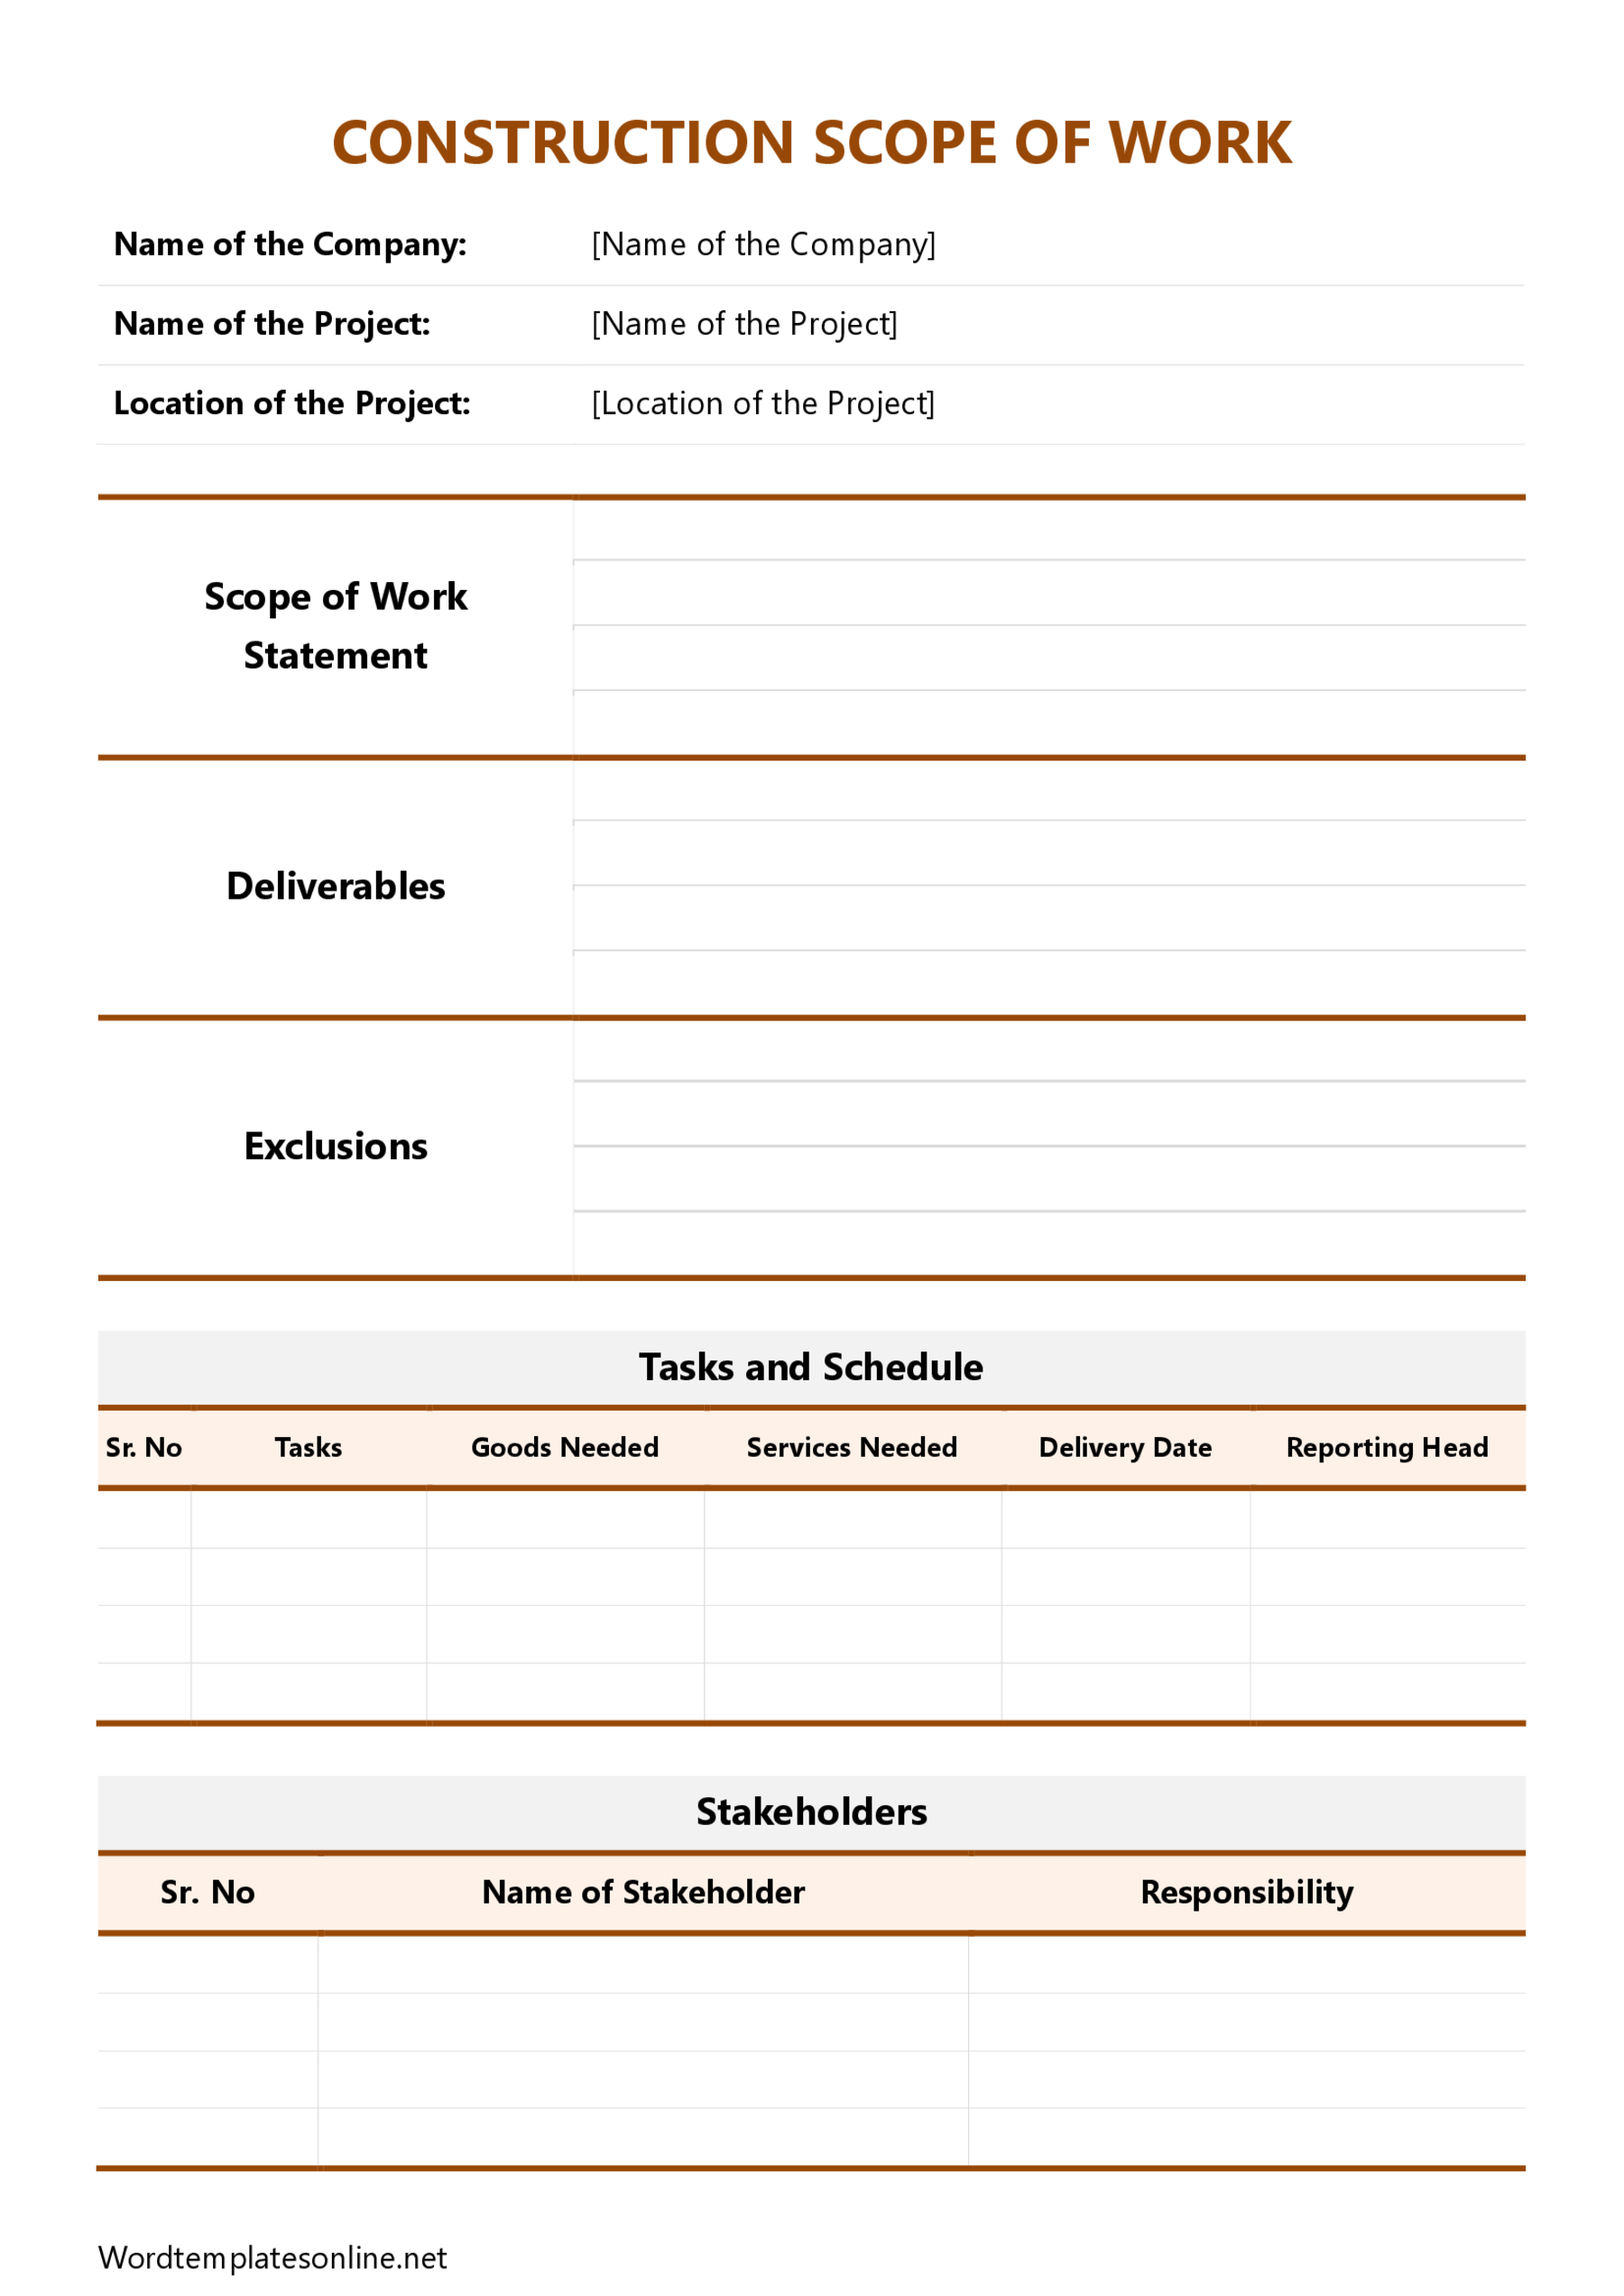 Free Construction Scope of Work Template Example